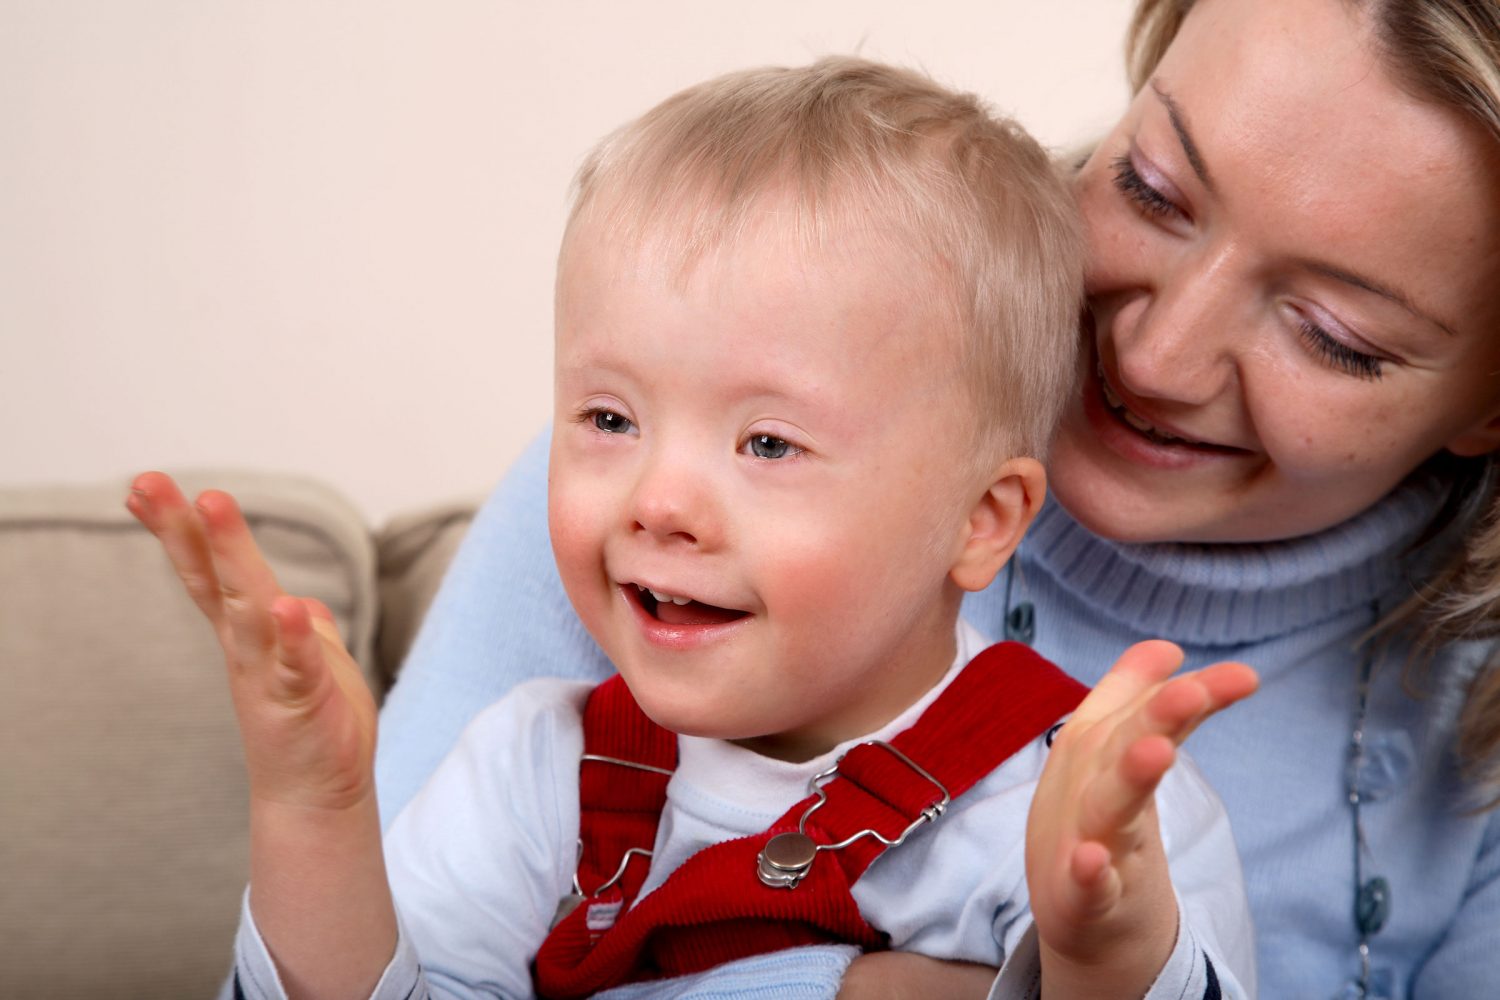 Young boy with Down syndrome clapping on mom's lap